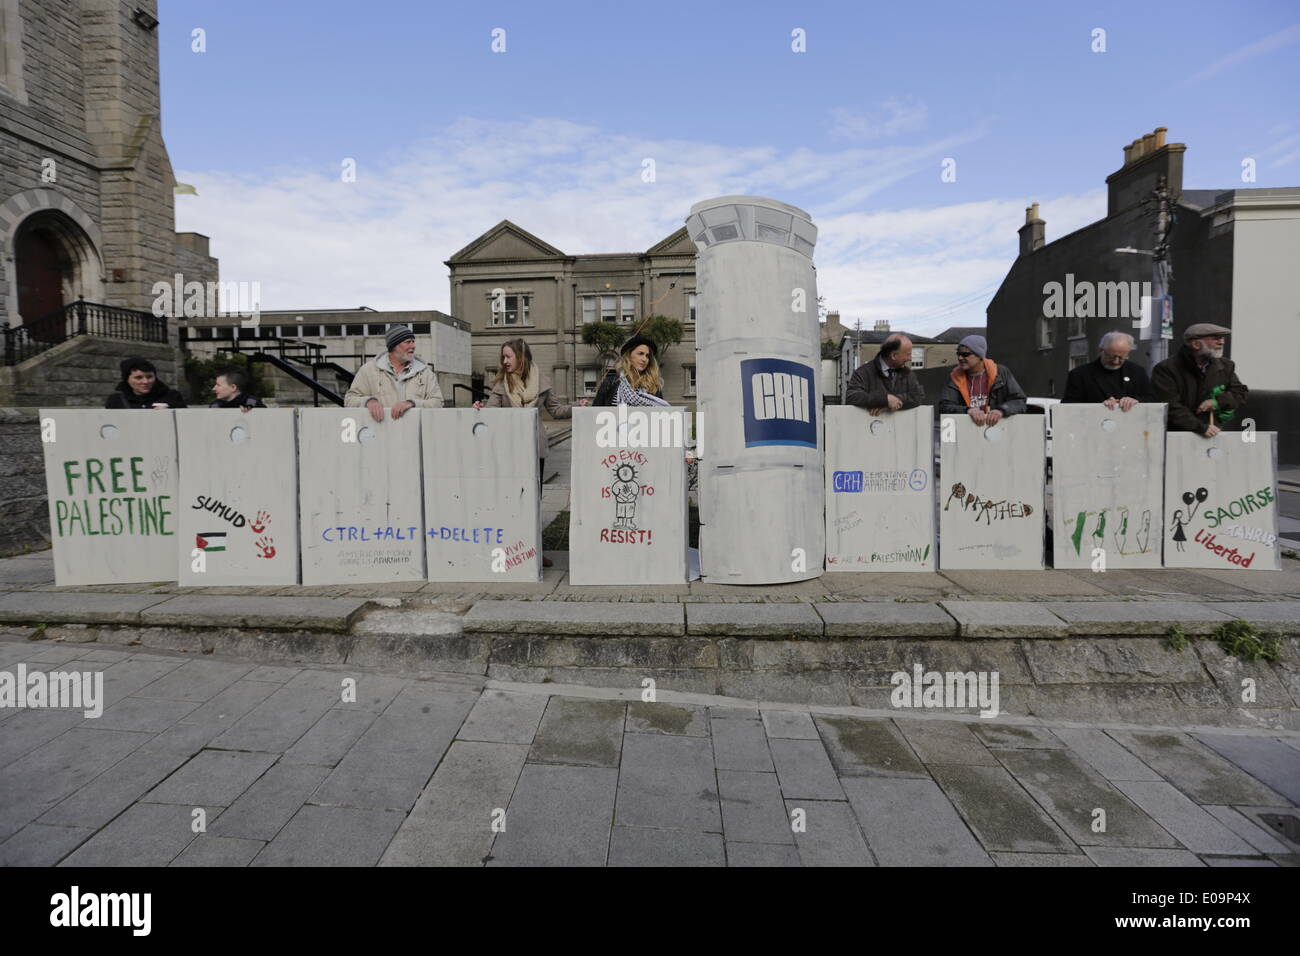 Dœn Laoghaire, Ireland. 7th May 2014. Activists from the Ireland Palestine Solidarity Campaign (IPSC) have built a model of the wall that divides Palestine and Israel at the protest outside the Annual General Meeting of the Irish building materials group CRH plc. The CRH Divestment Campaign of the IPSC calls for CRH plc to sell its stake in the Israeli Mashav Initiative and Development Ltd which owns the company which produces the cement for the wall that divides the West Bank from Israel. Credit:  Michael Debets/Alamy Live News Stock Photo